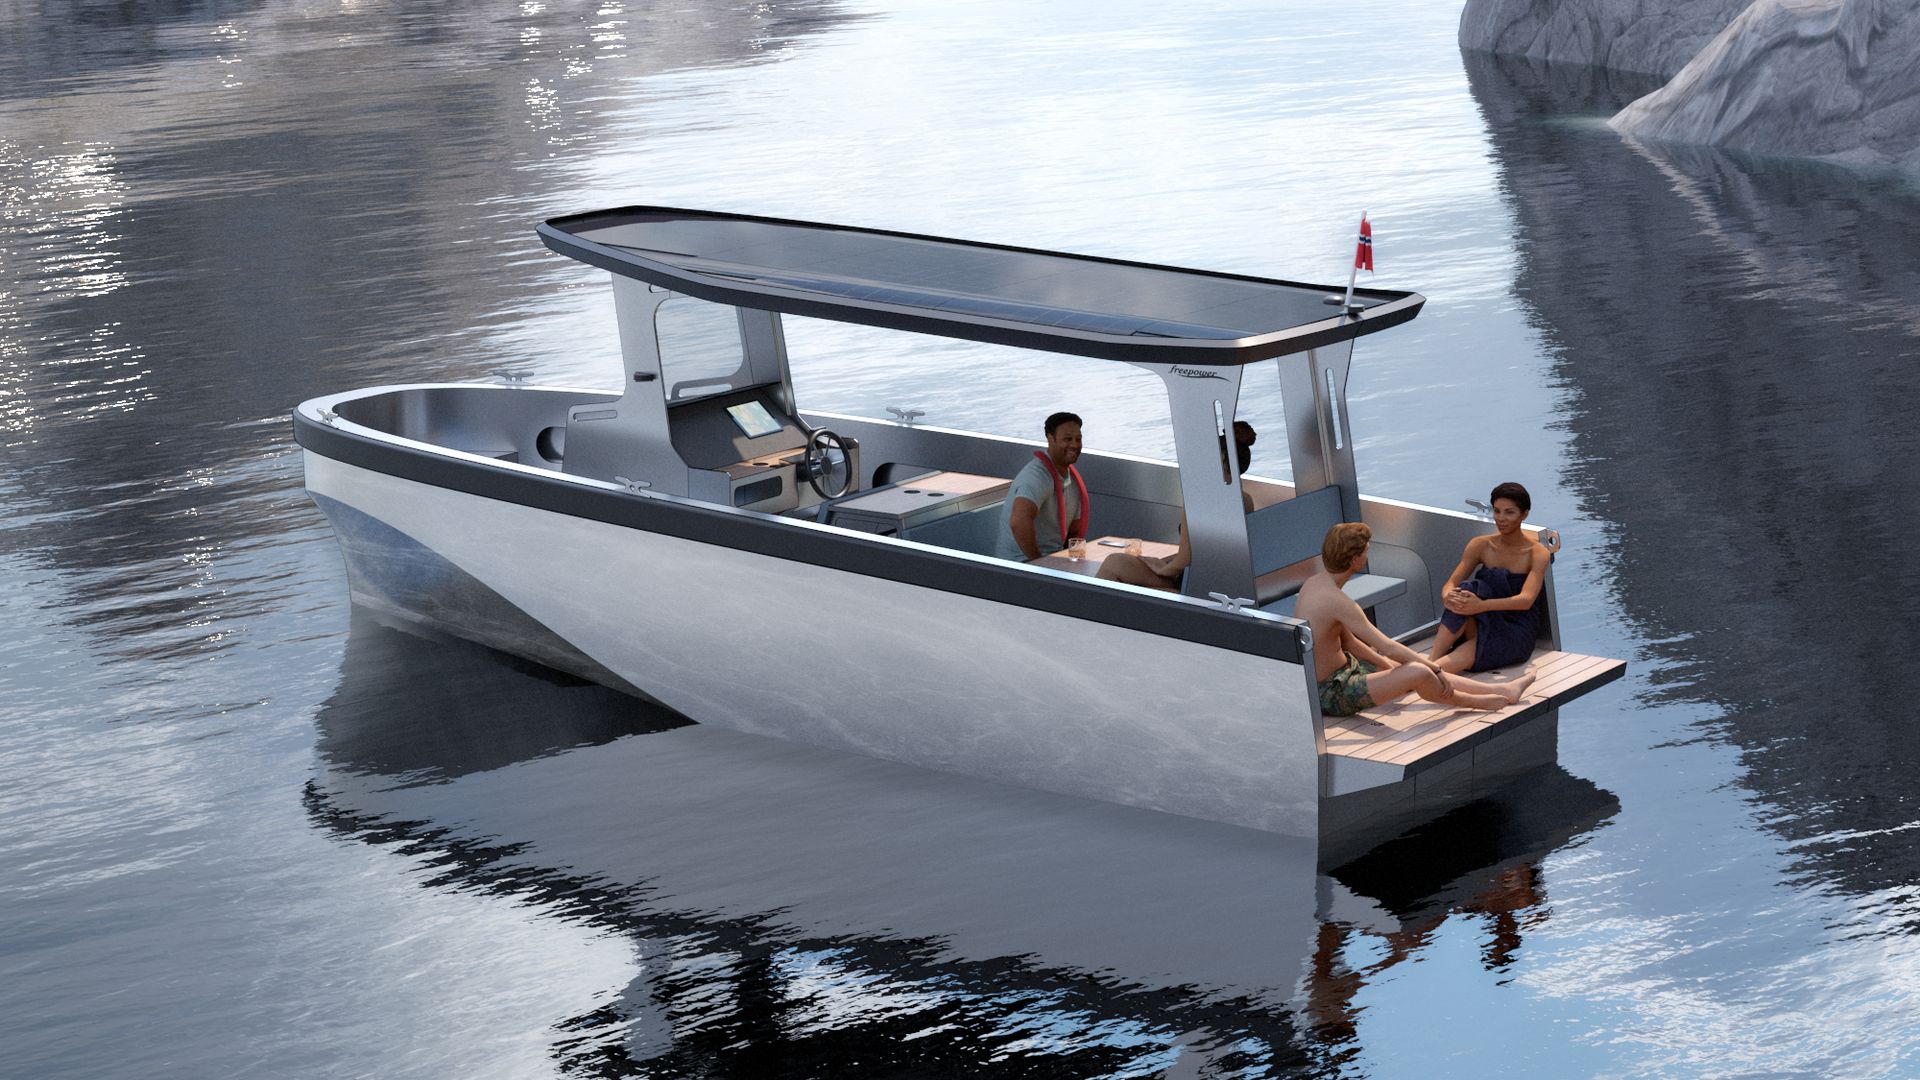 Contribution: Solar Electric Boat✪